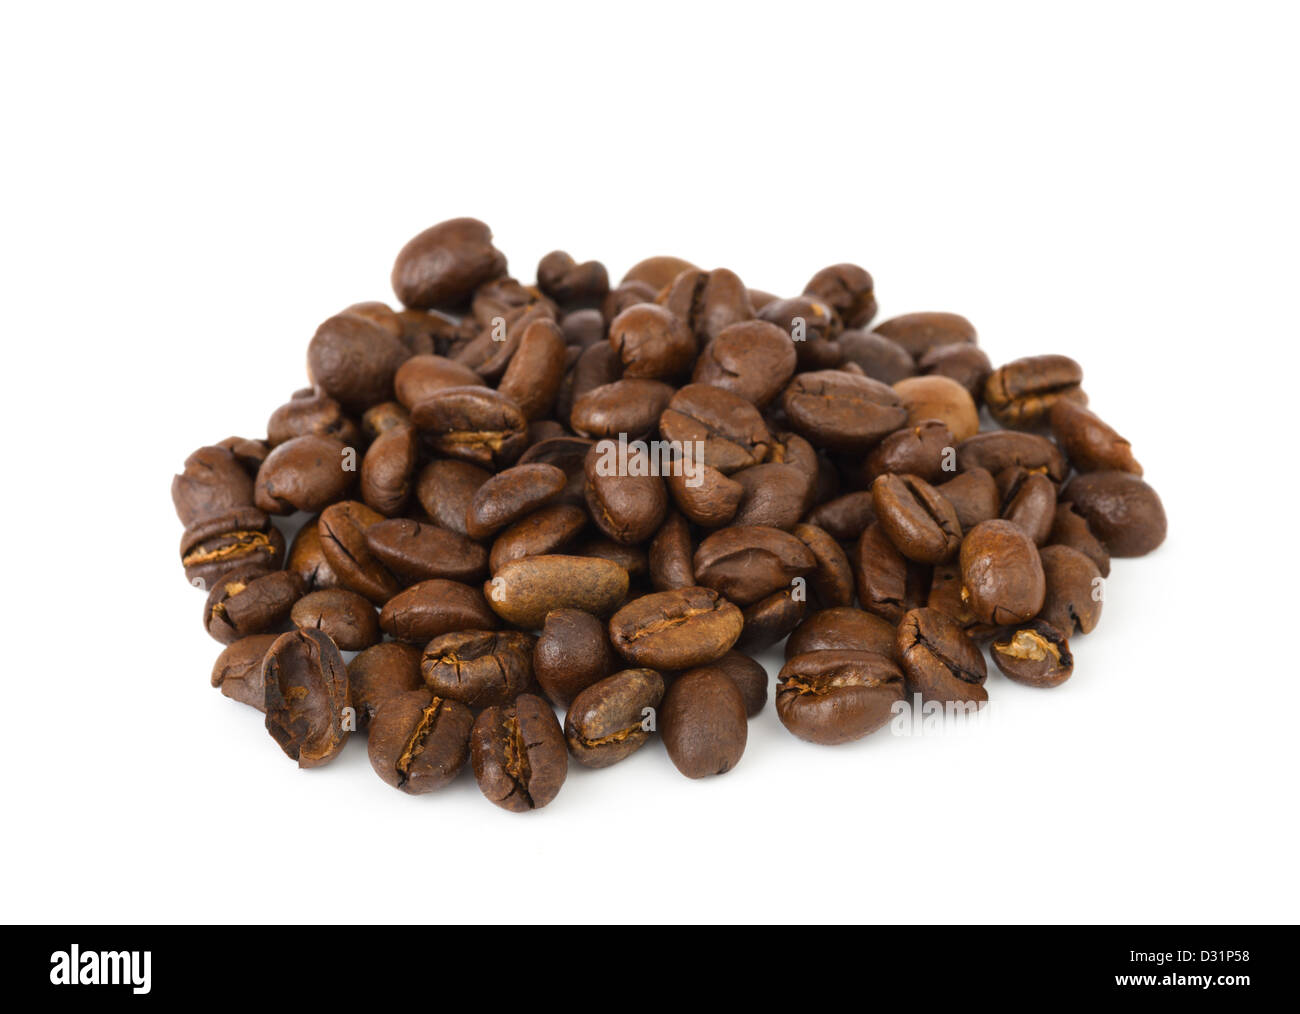 Dried coffee beans Stock Photo